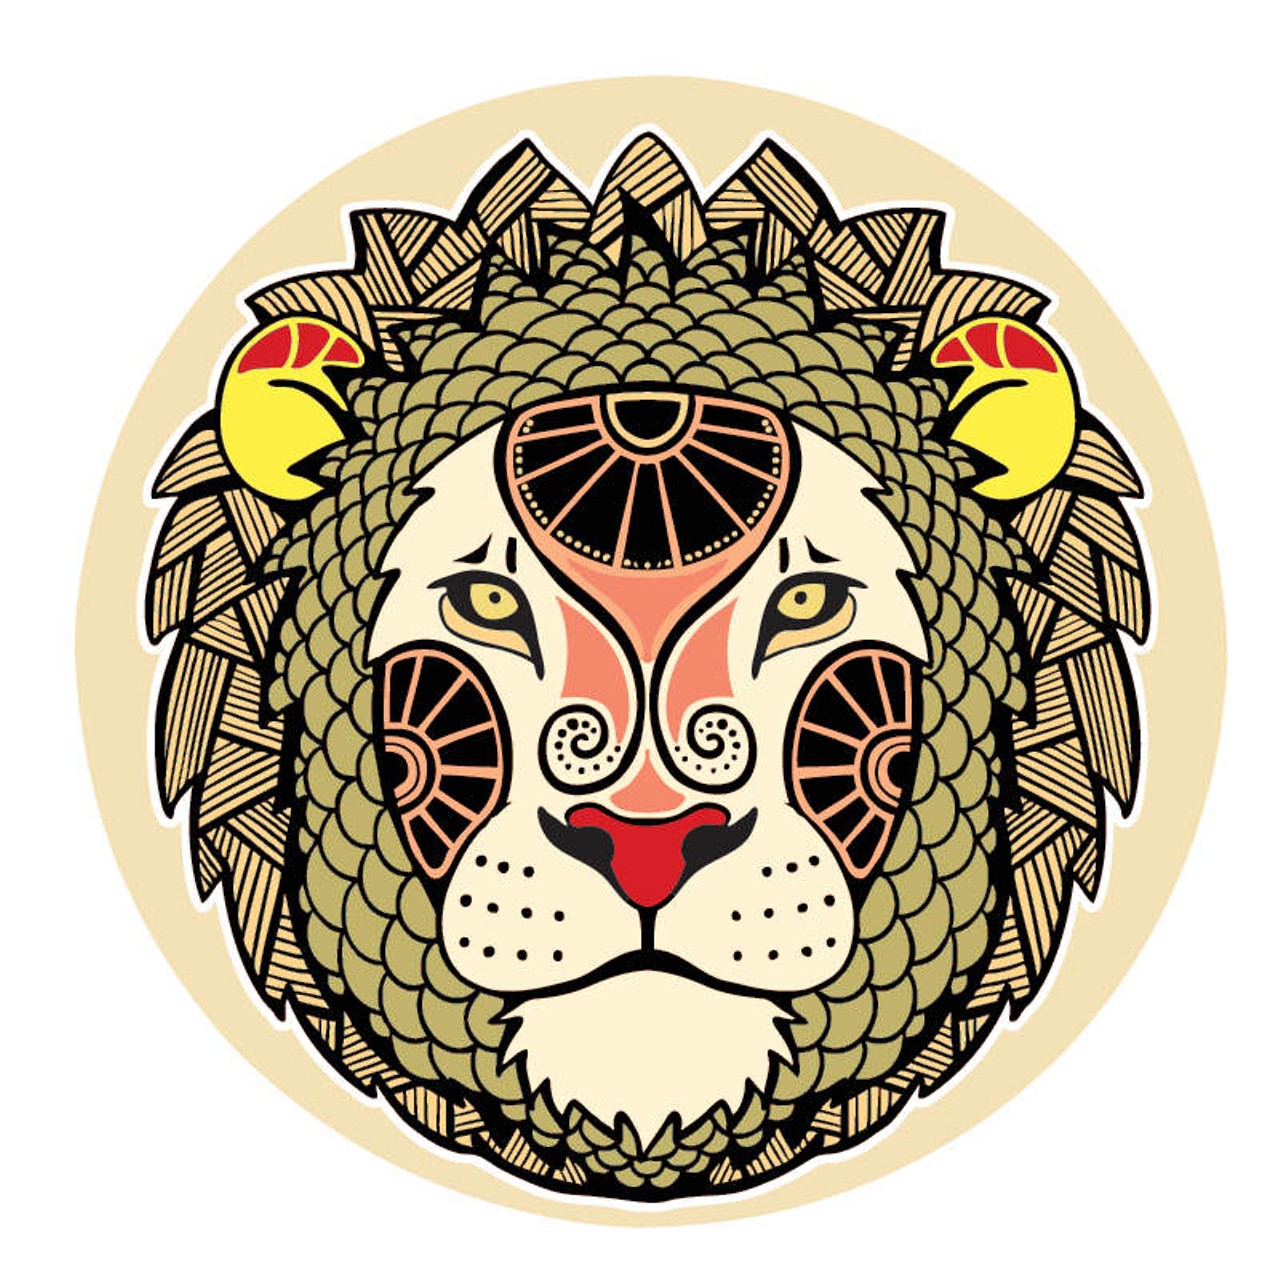 LEO (July 21 &#150; August 20): You don&#146;t care what people think about where you&#146;re at. It&#146;s been such a mind blow to finally begin to see how little others have been there for you. If you wanted to you could use this as a great excuse to keep going downhill &#151; but for whatever reason this absence of support has taught you how to rise up and be who you are. After a long stretch of wondering what it would take to want to keep living the answer has come in the form of a person or an opportunity that is here to help you shine. Open your heart to the newness of love and to the beginning of happier times.